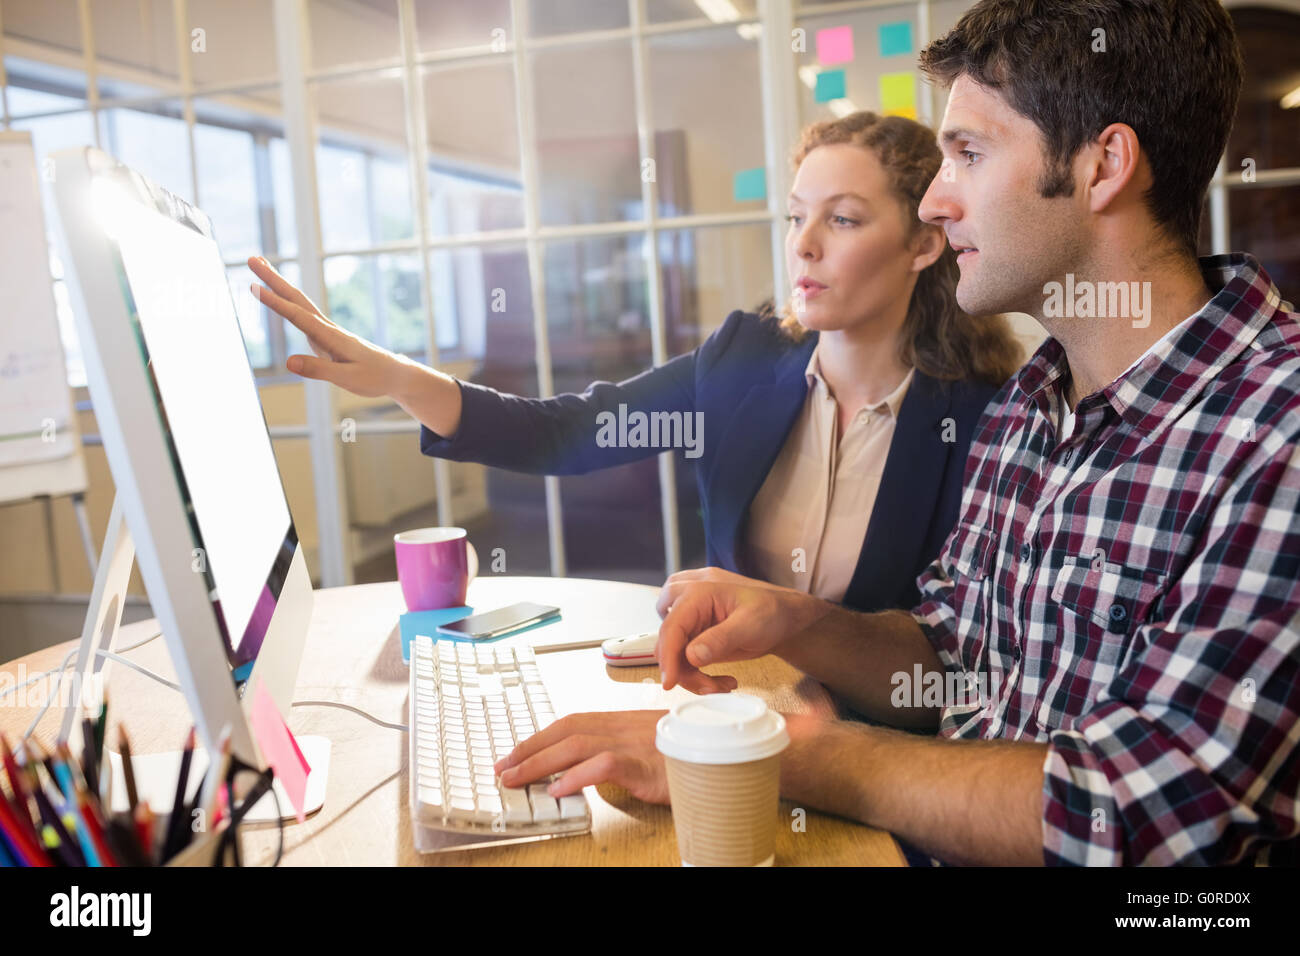 Colleagues using a computer Stock Photo